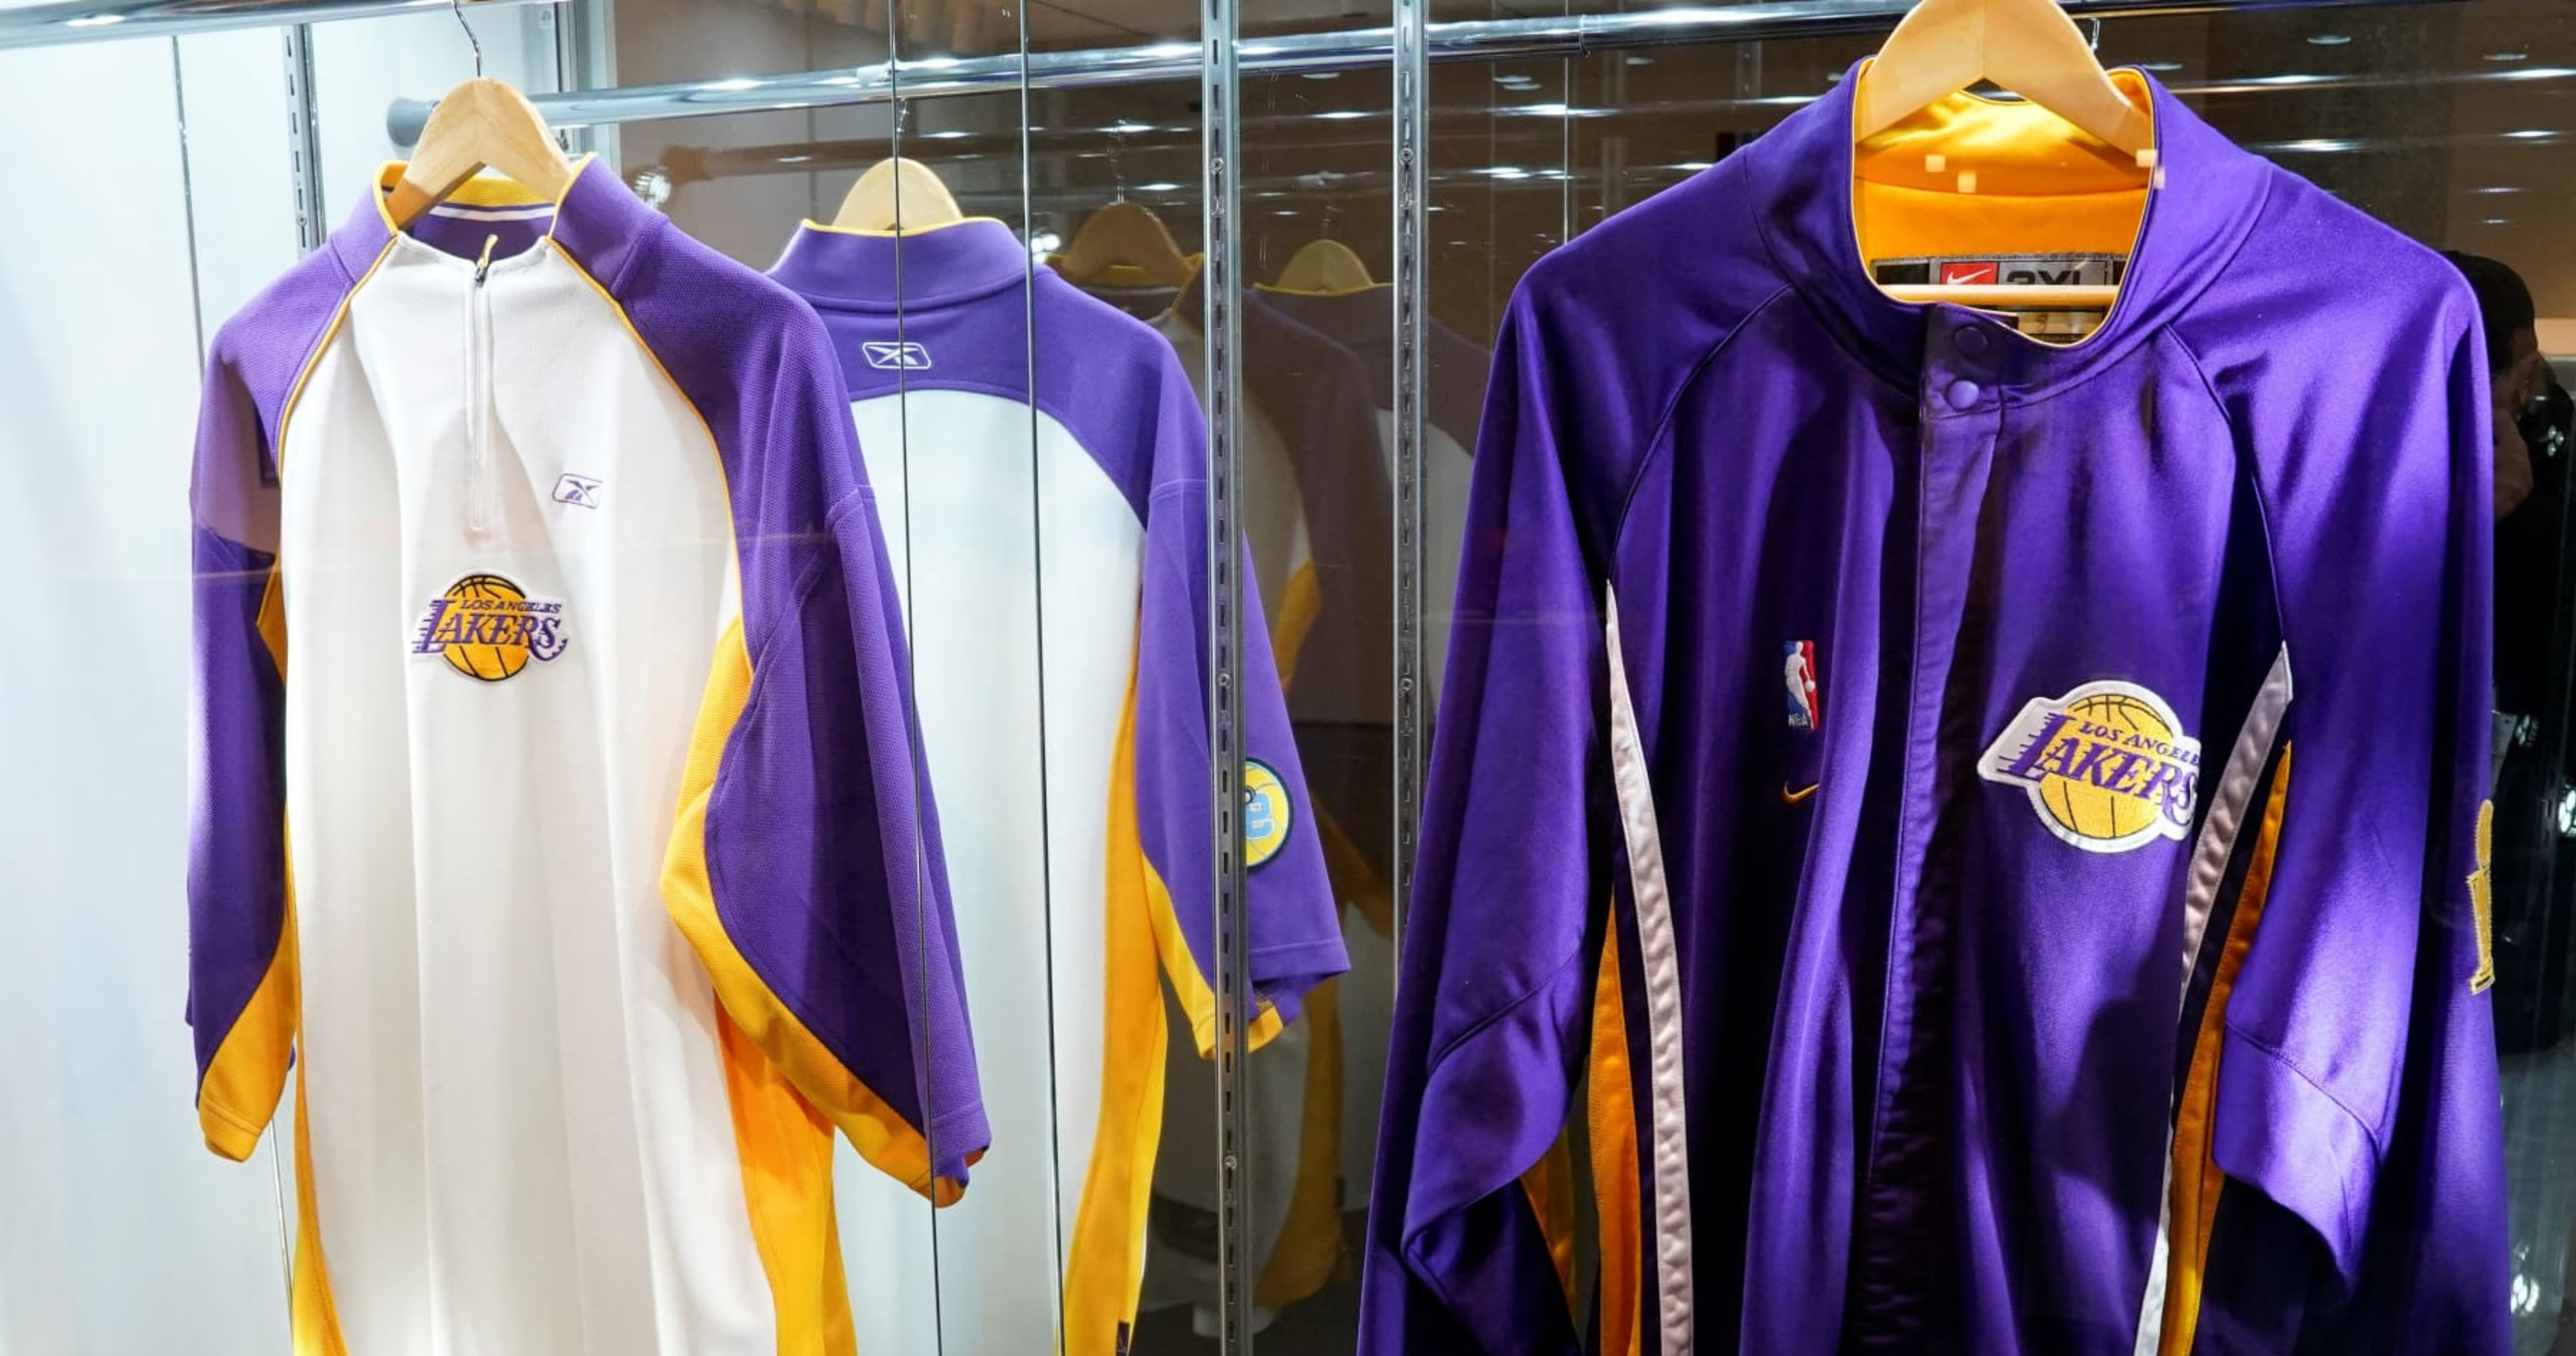 Kobe Bryant jersey sells for record $5.8 million at auction